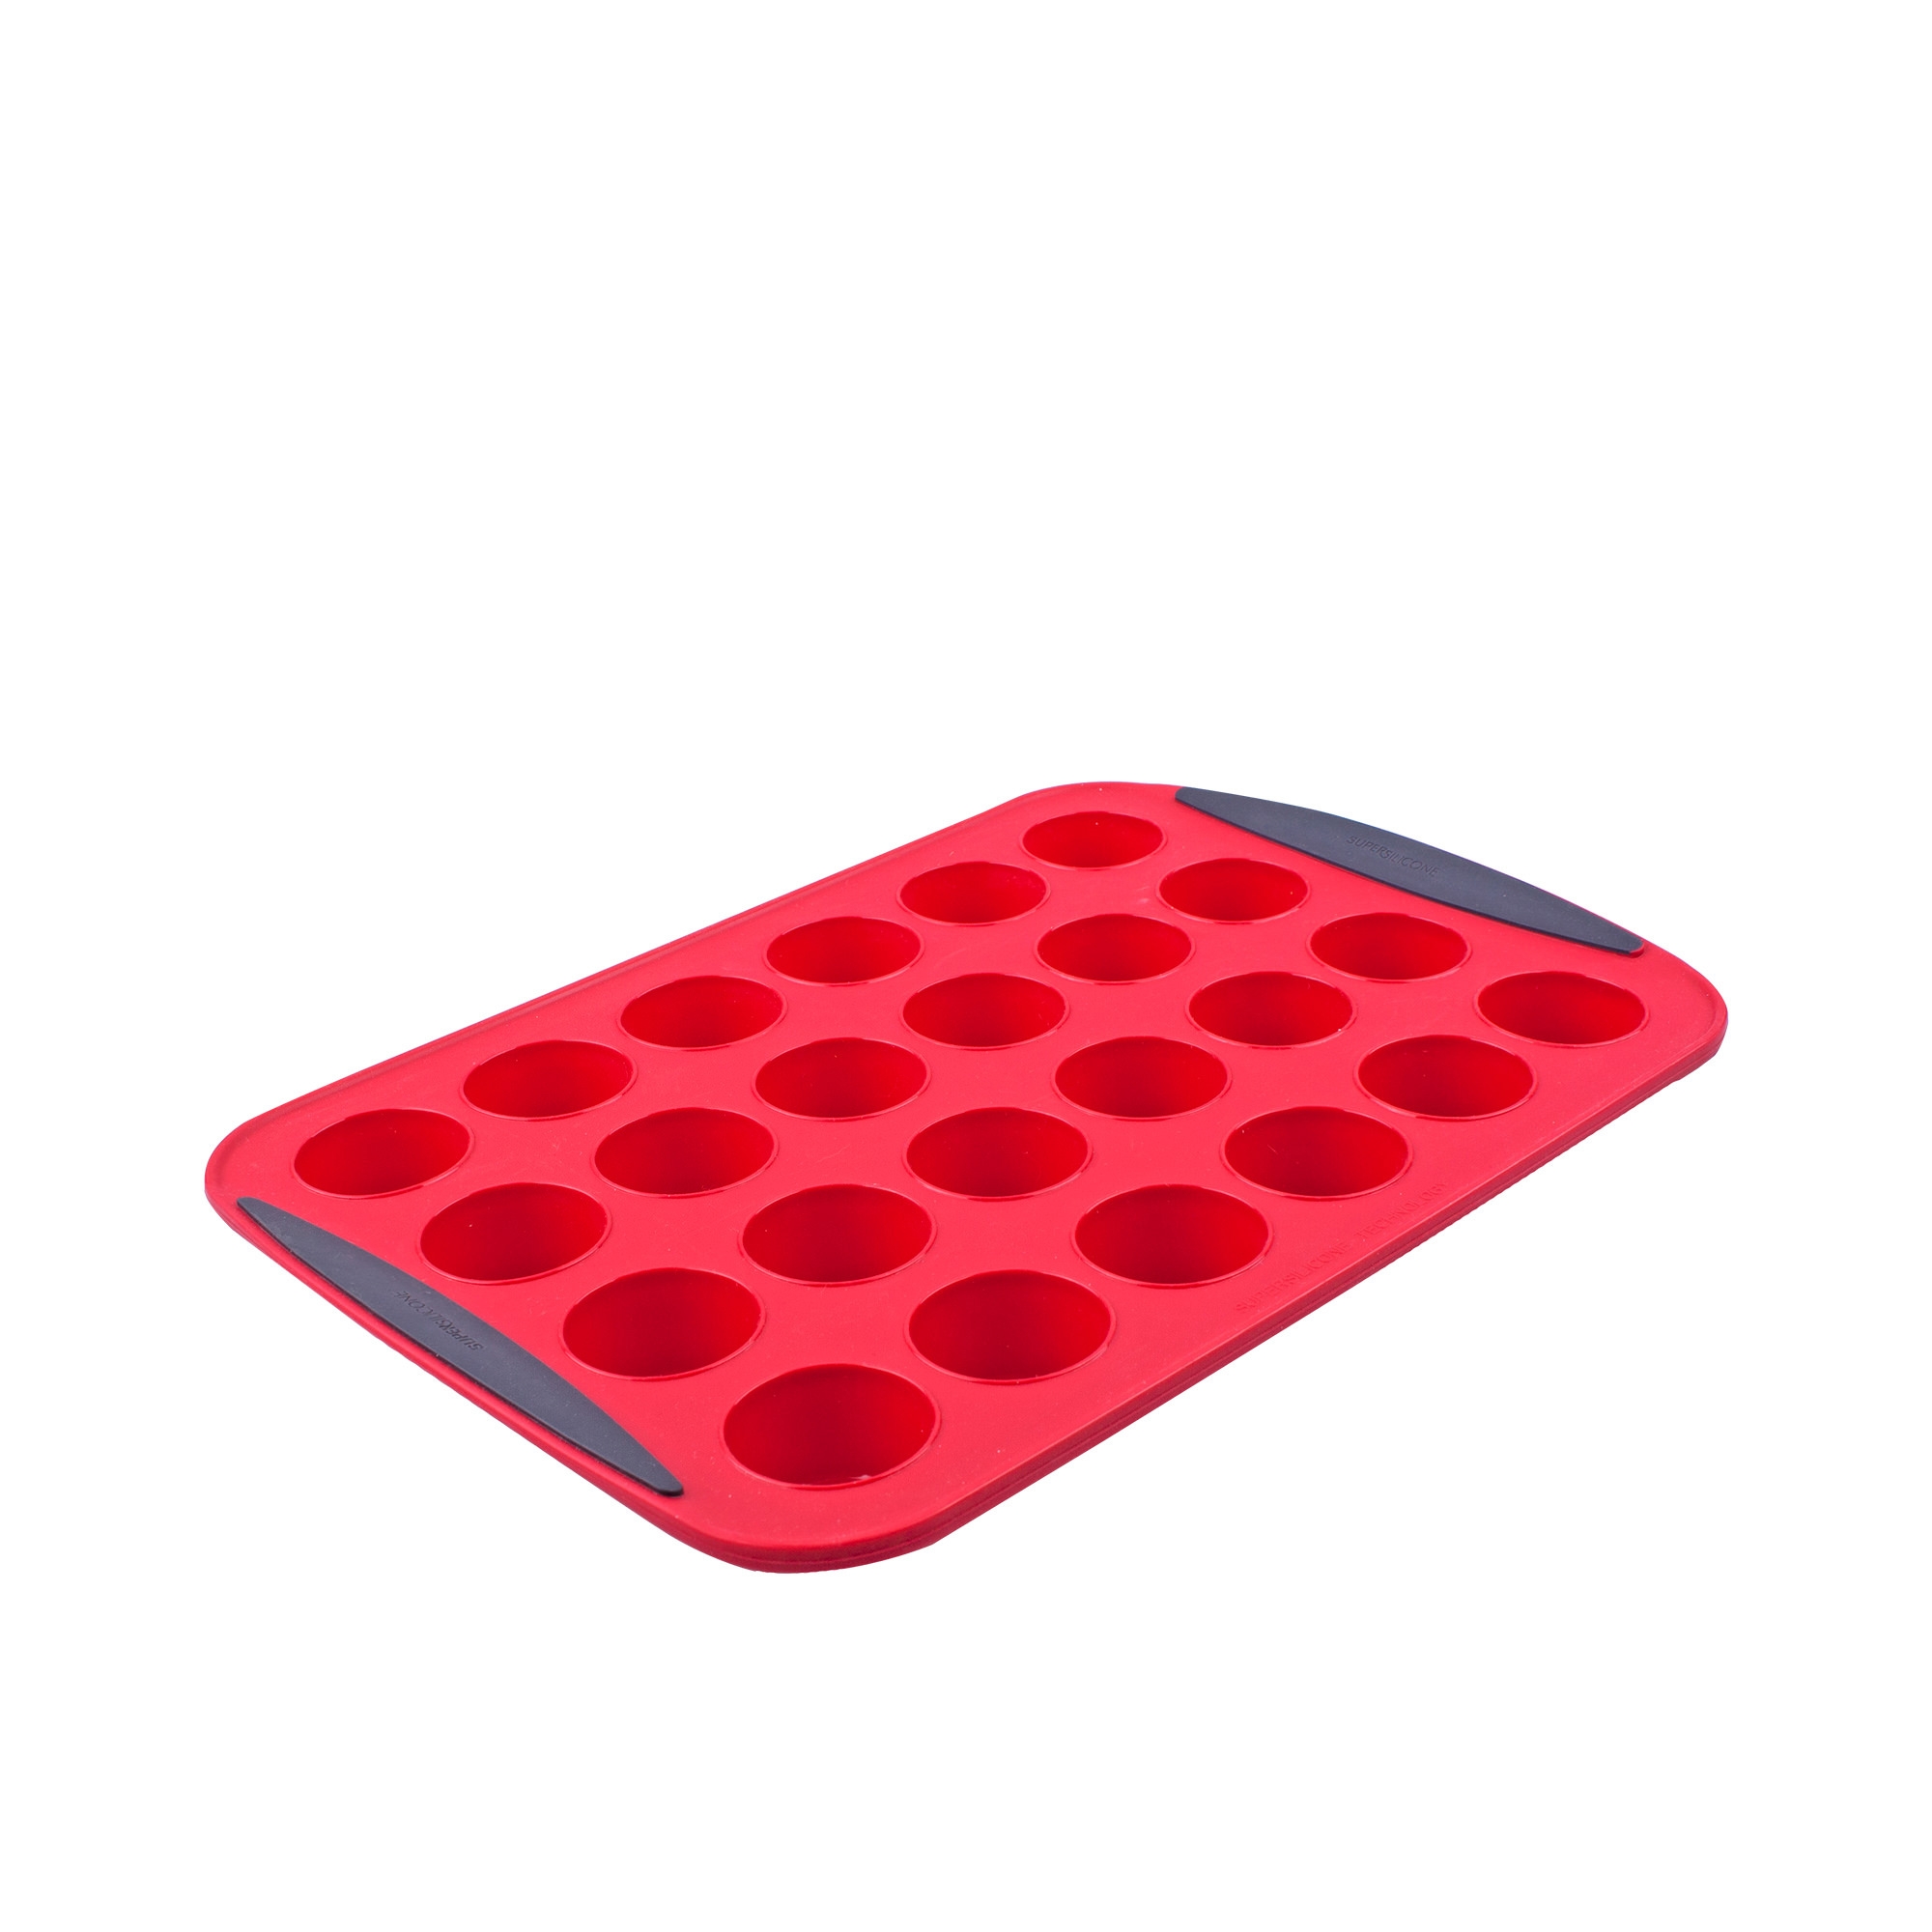 Daily Bake Silicone Mini Muffin Pan 24 Cup Red Image 1